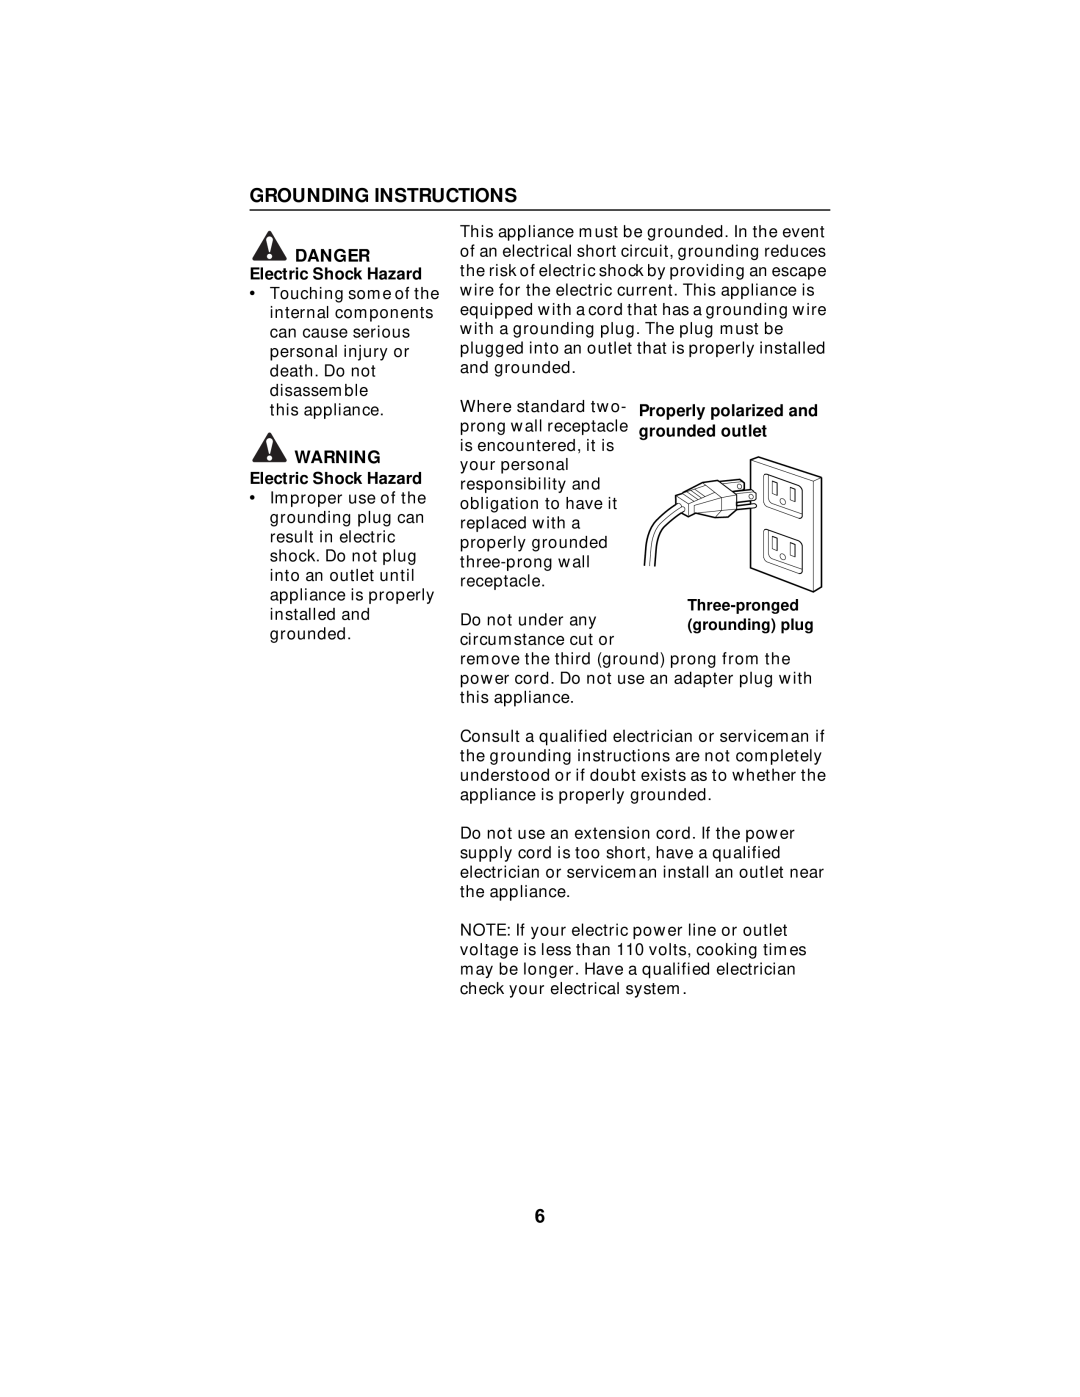 Maytag MMV5100AA manual Grounding Instructions, Danger, Electric Shock Hazard, Properly polarized and grounded outlet 